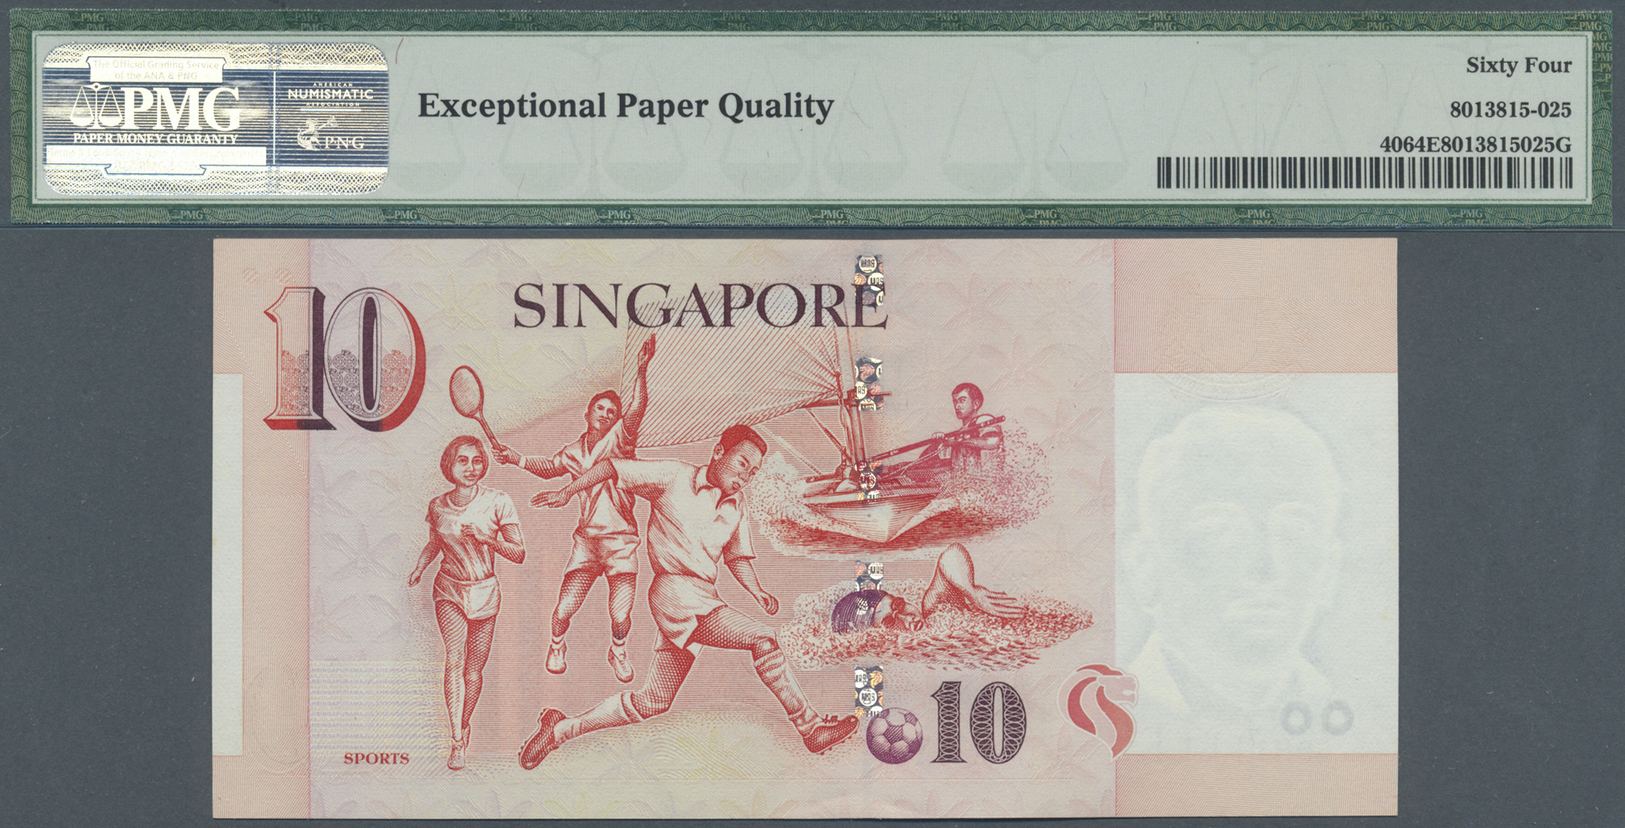 03566 Singapore / Singapur: Large And Rare Set Of 10 Pcs 10 Dollars ND(1999) P. 40, All With Special Numbers And All PMG - Singapore